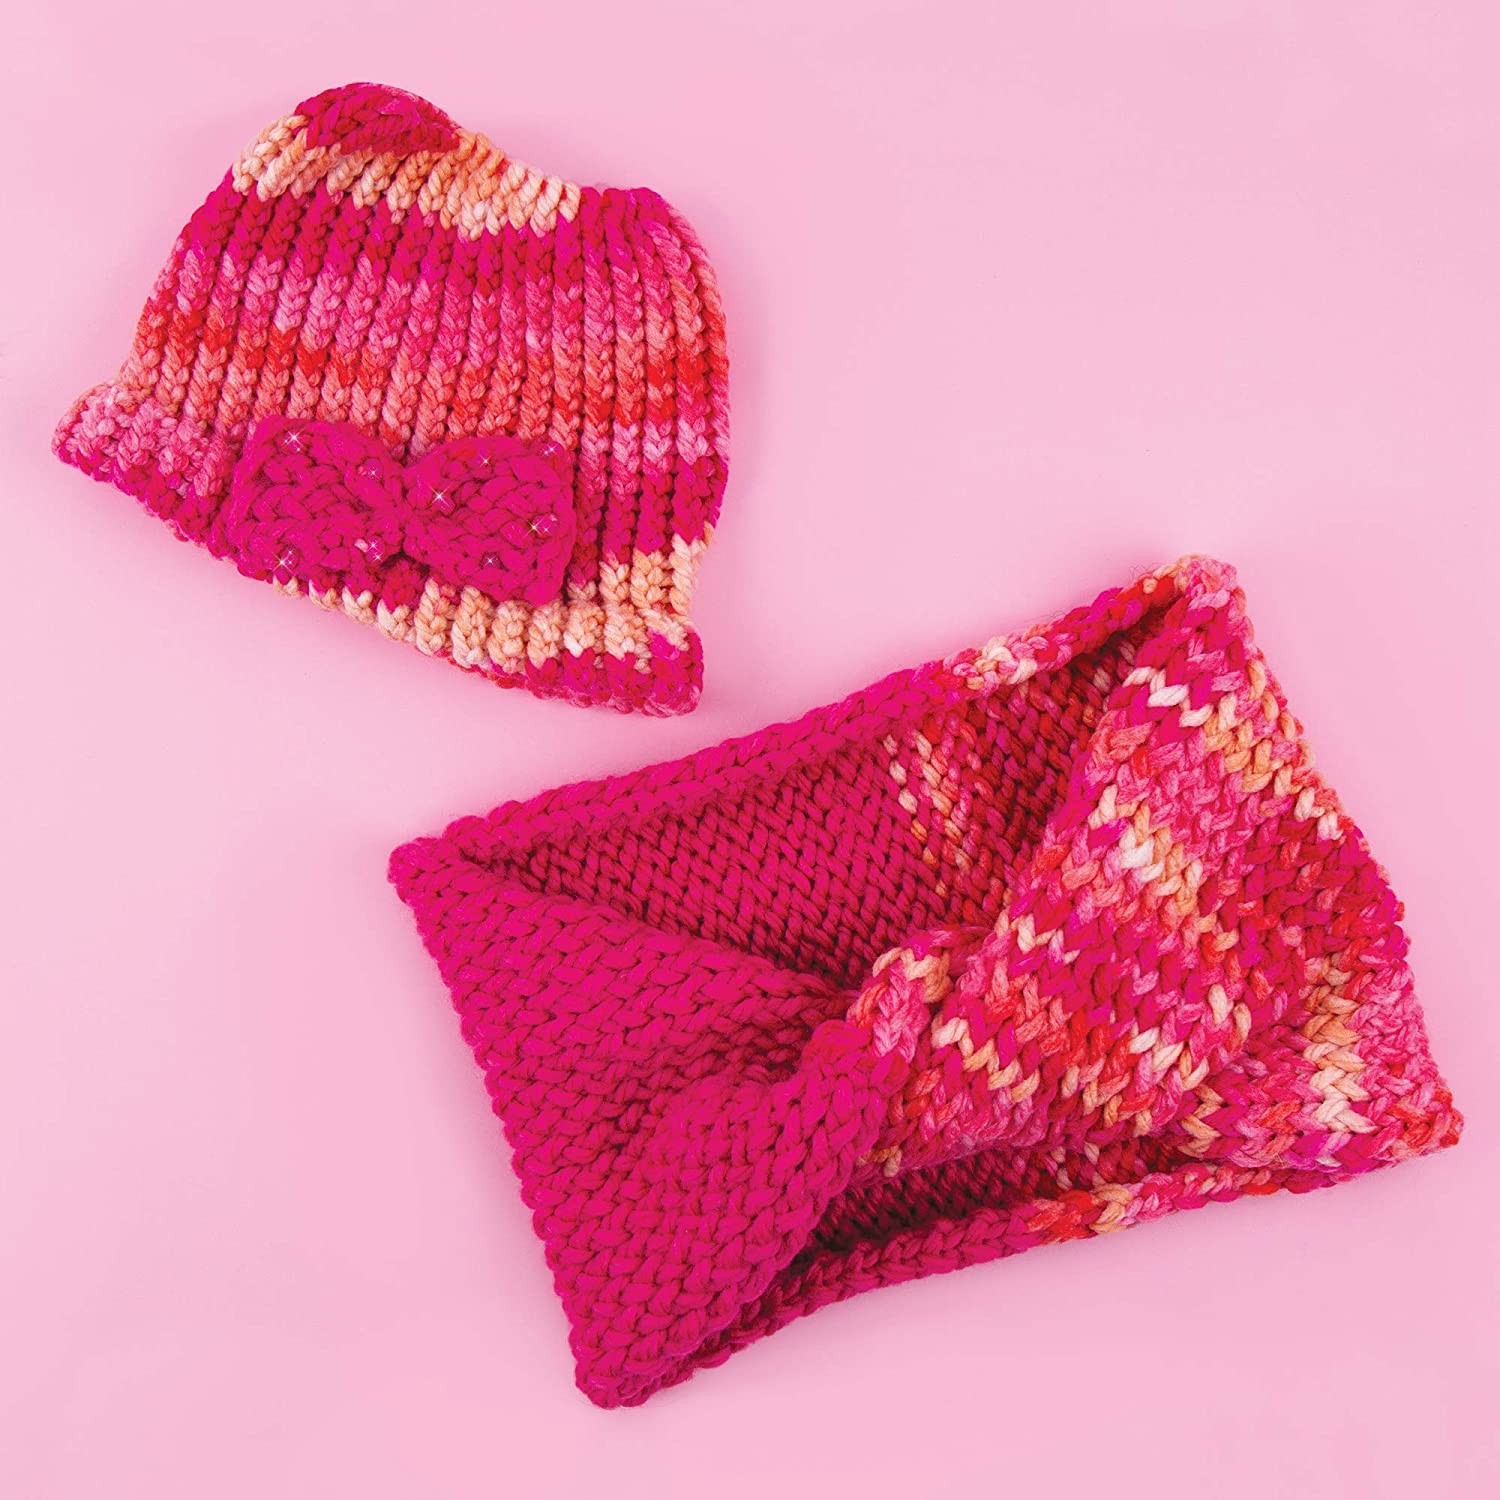 Make It Real - Beanie and Infinity Scarf Knitting Kit